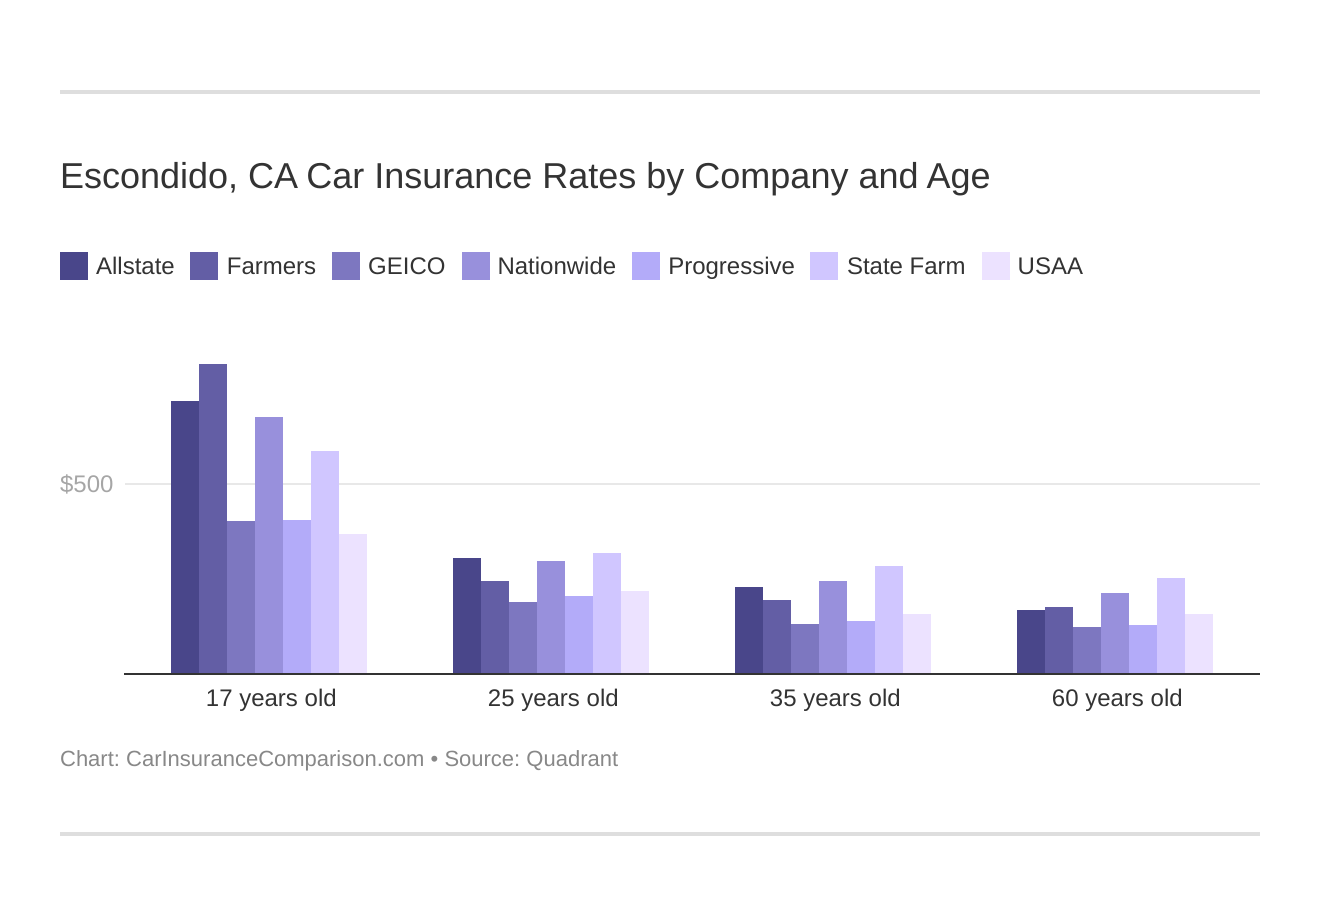 Escondido, CA Car Insurance Rates by Company and Age